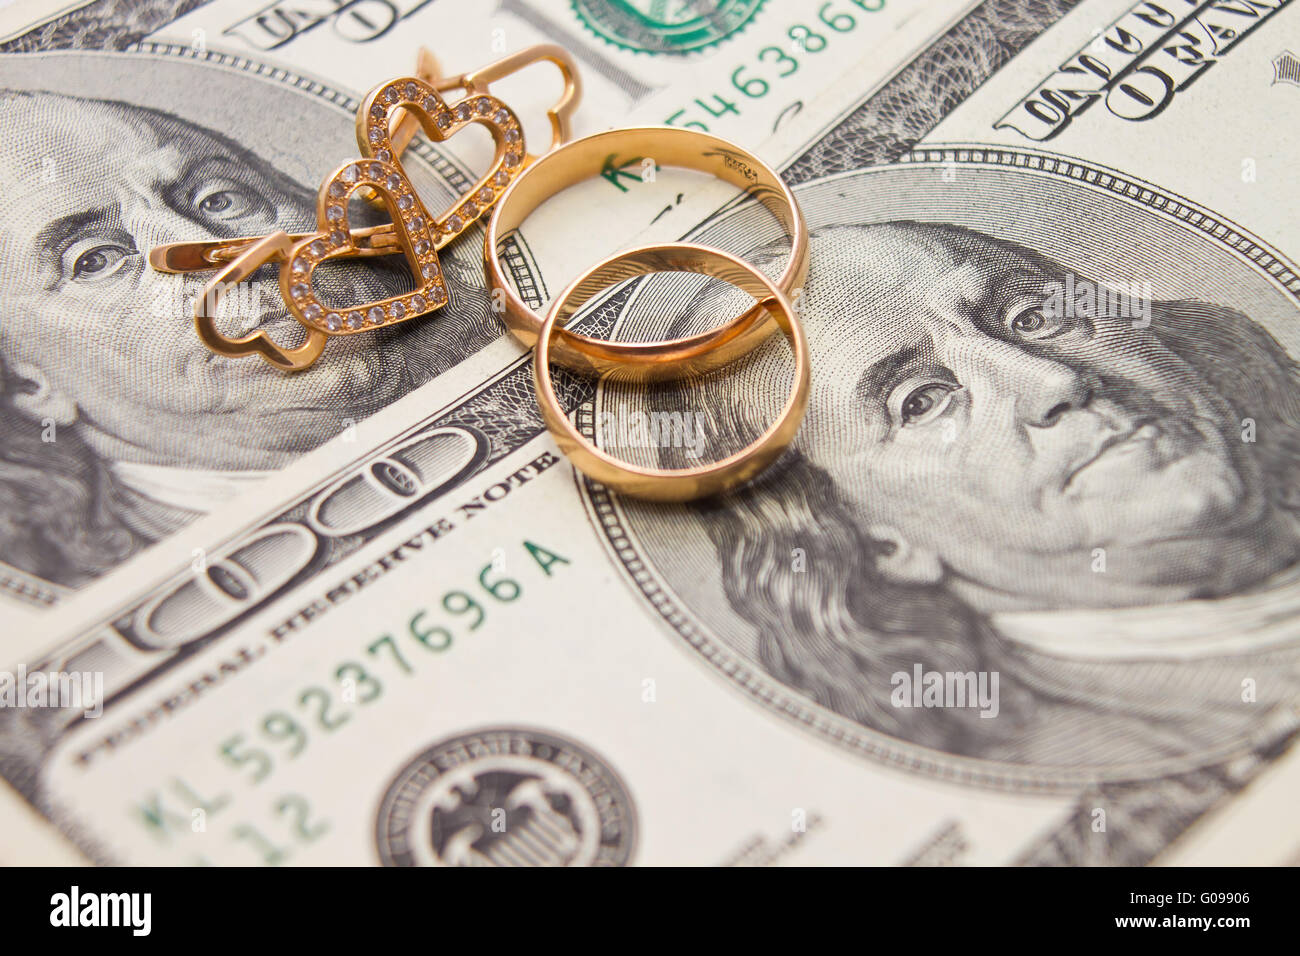 Wedding rings, gold chain and earrings in the form Stock Photo